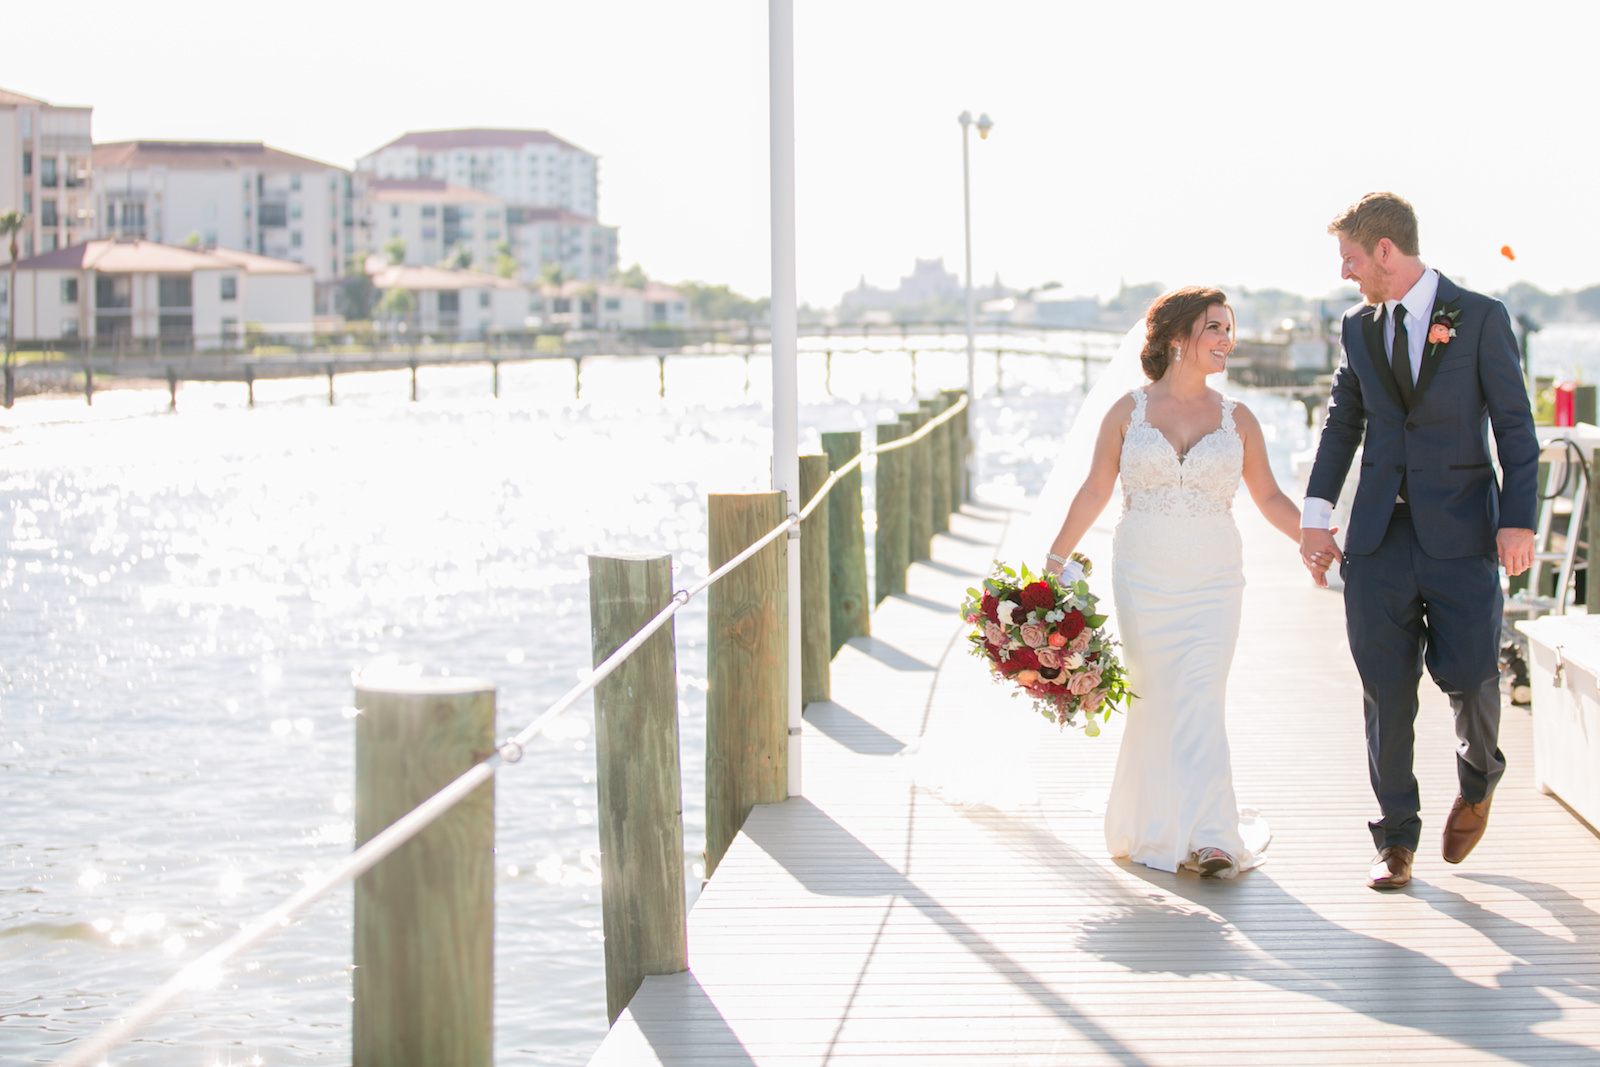 Bride and Groom Walking on Boat Dock Wedding Portrait | Tampa Bay Wedding Photographer Carrie Wildes Photography | Wedding Florist Iza’s Flowers | St. Pete Wedding Venue Isla Del Sol Yacht and Country Club